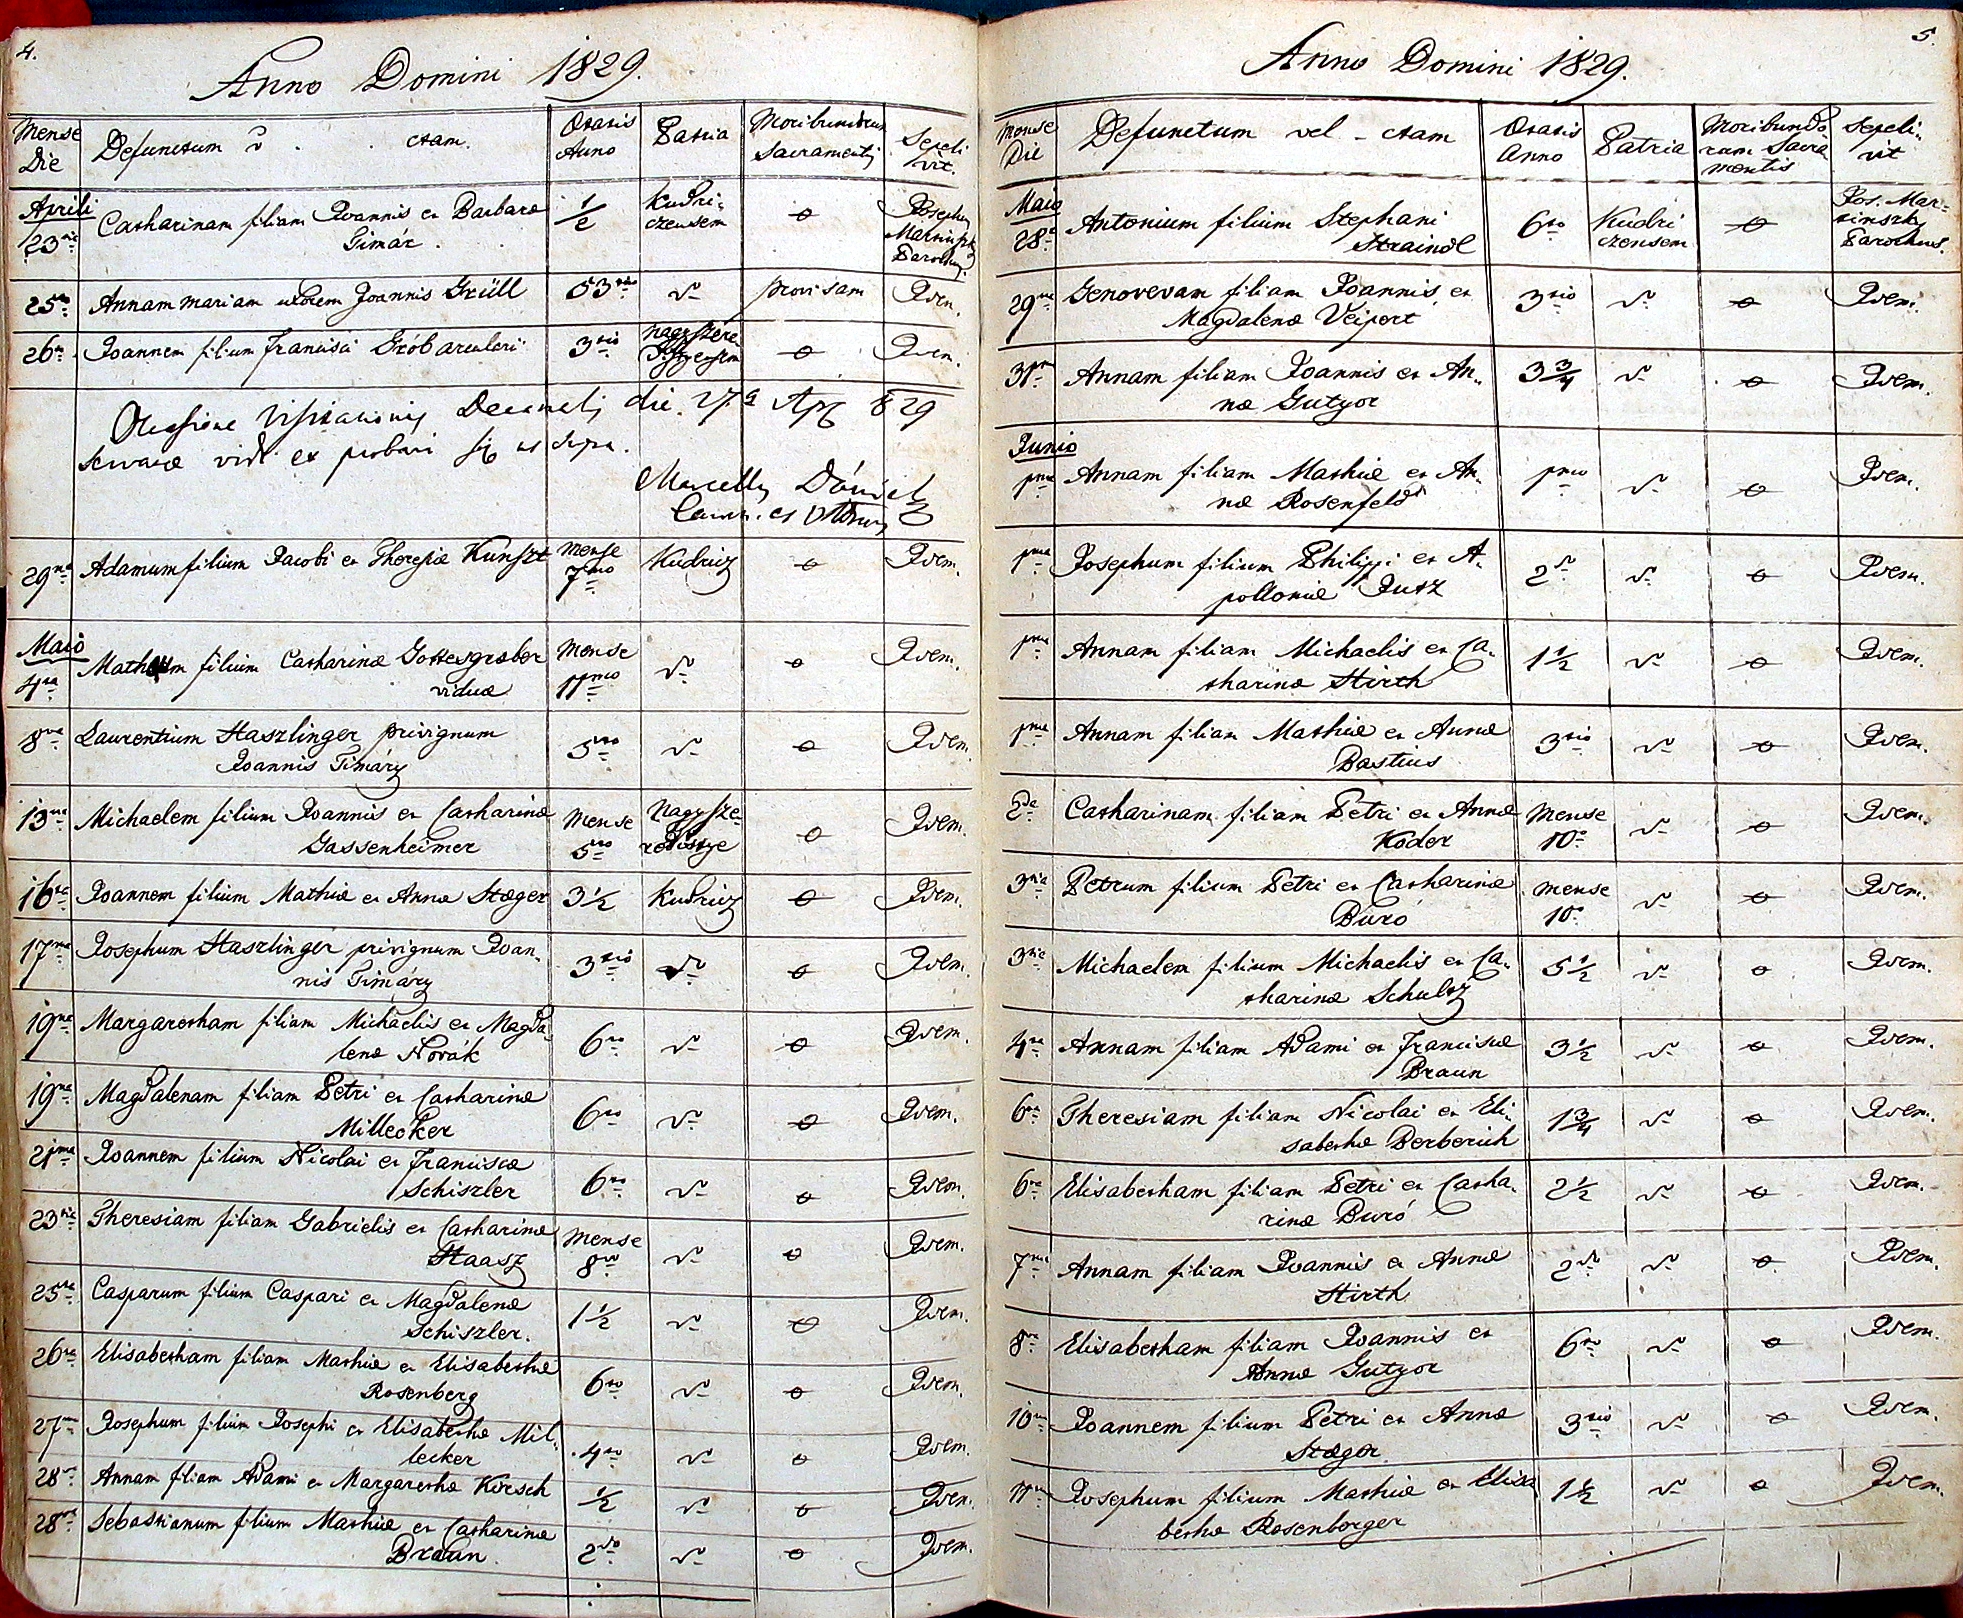 images/church_records/DEATHS/1775-1828D/004 i 005